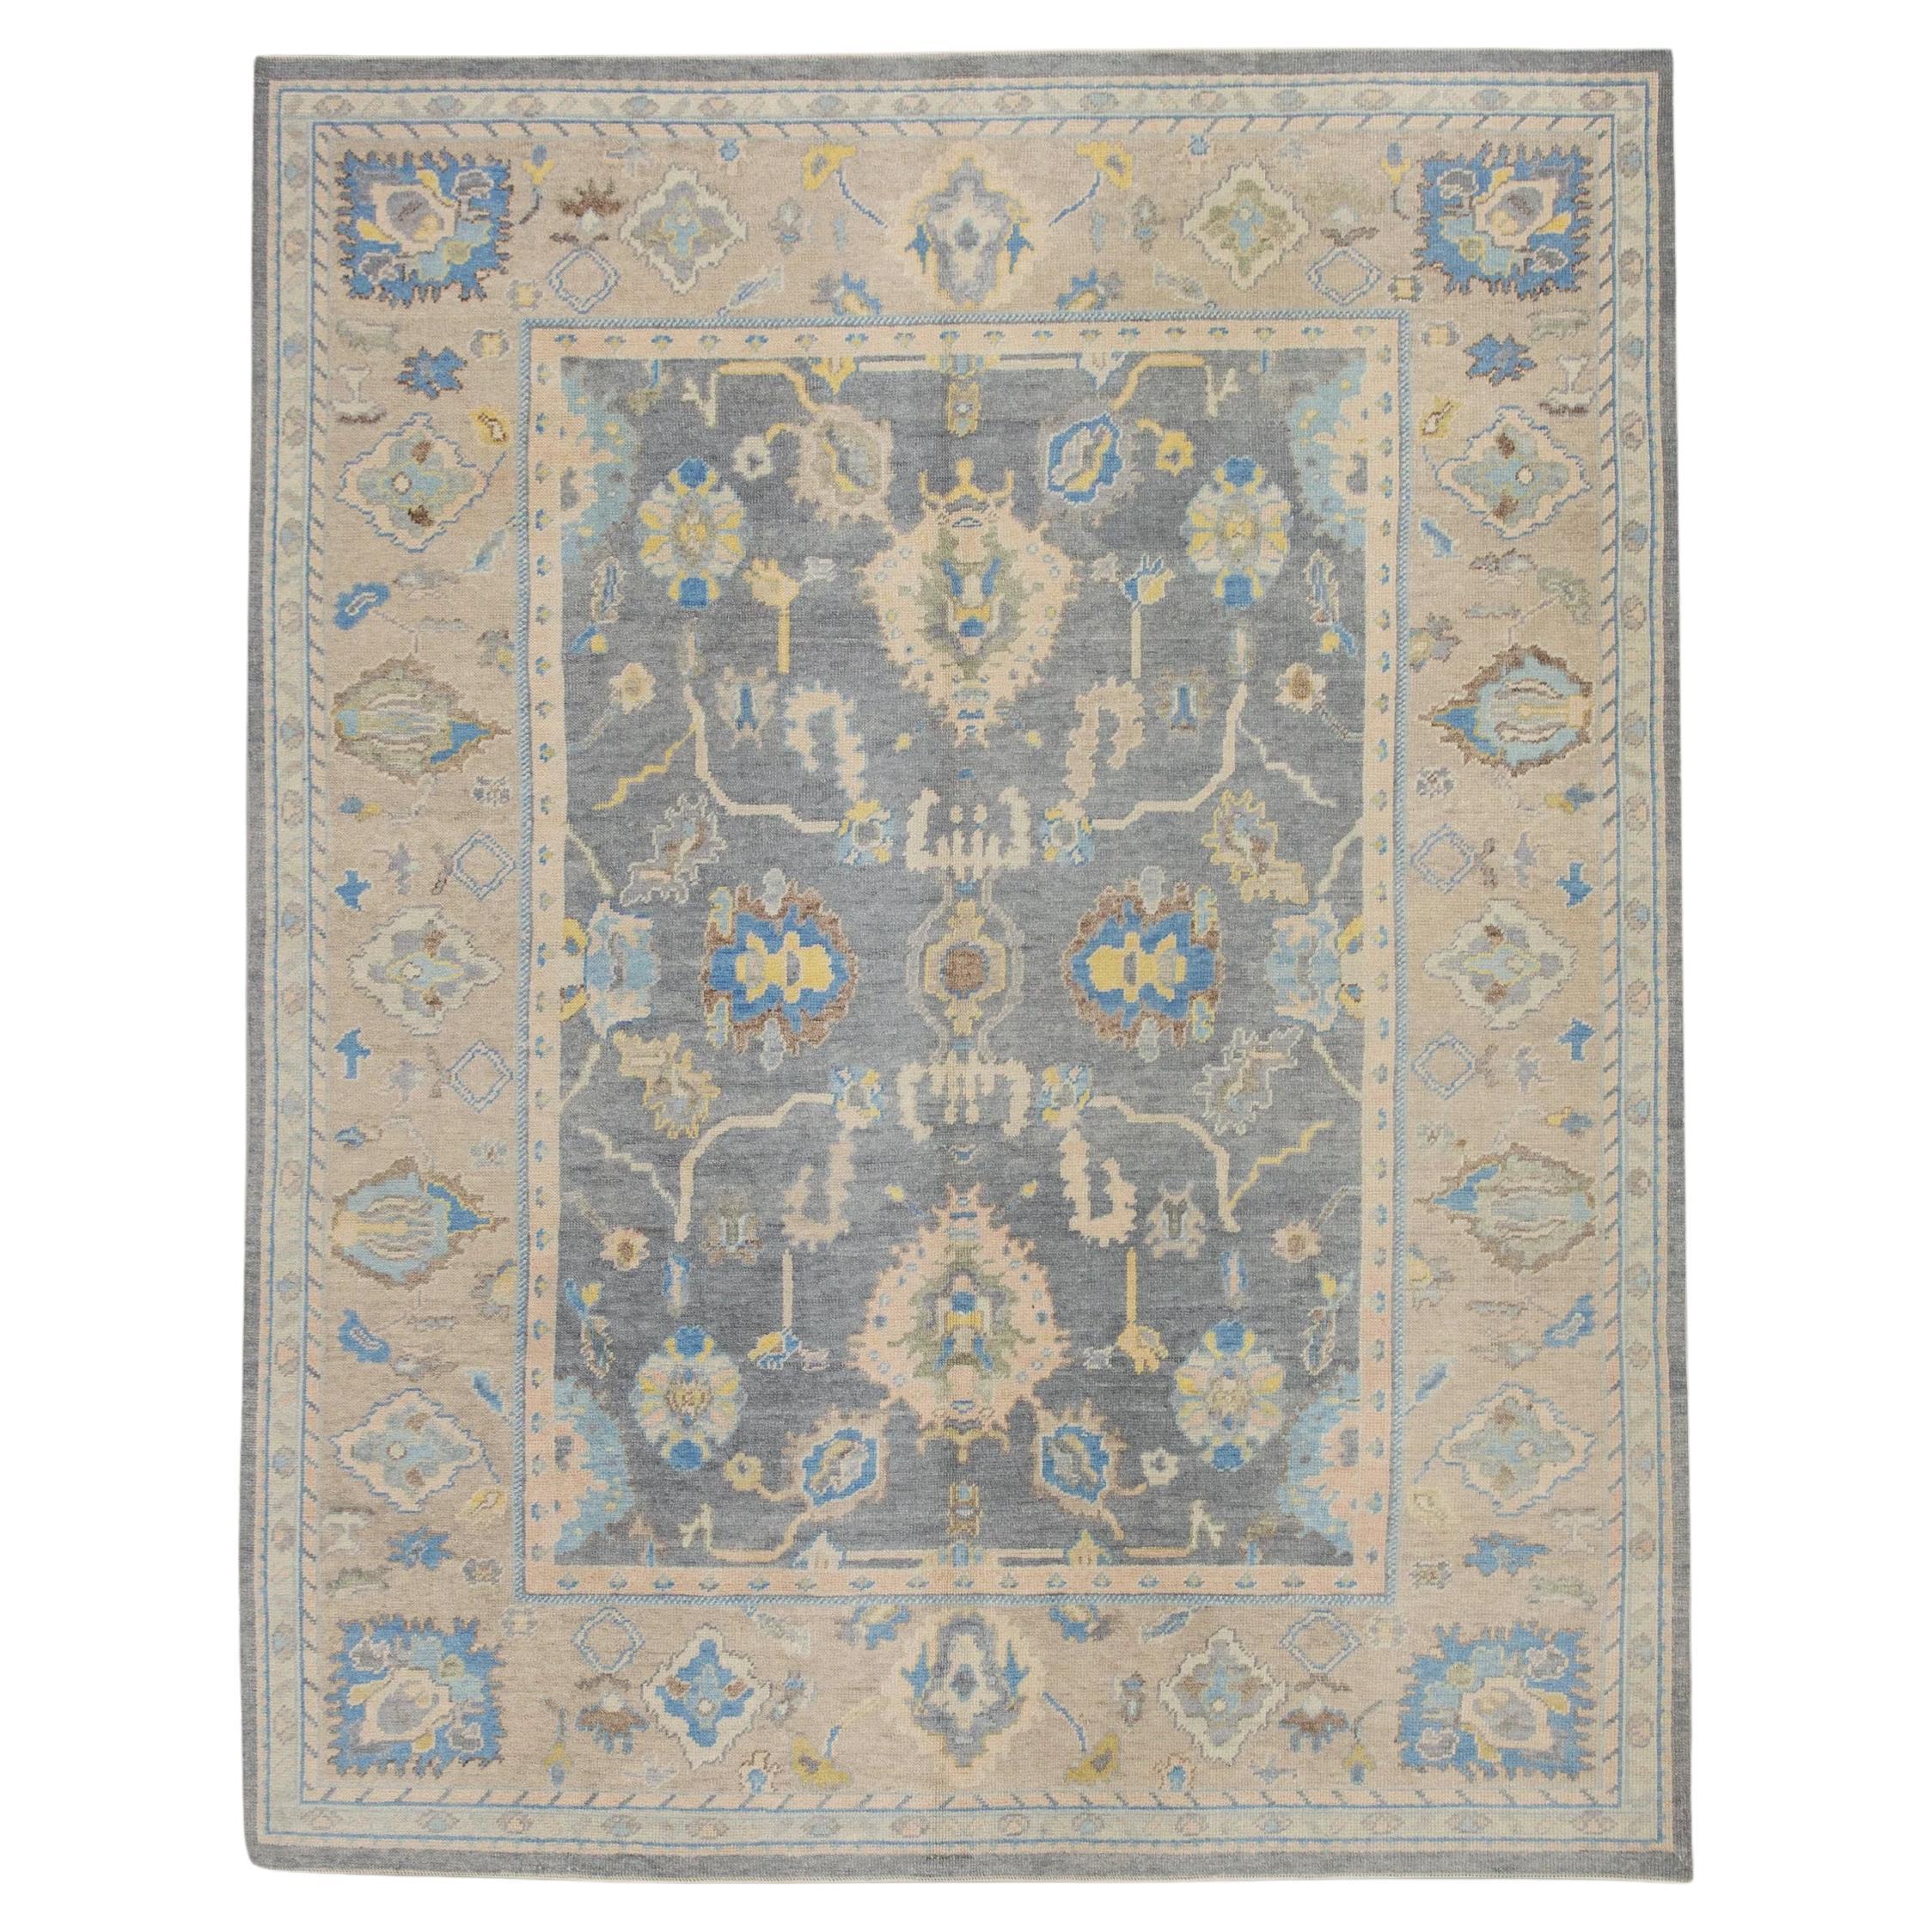 Floral Handwoven Wool Turkish Oushak Rug in Brown and Blue 7'11" x 9'11"